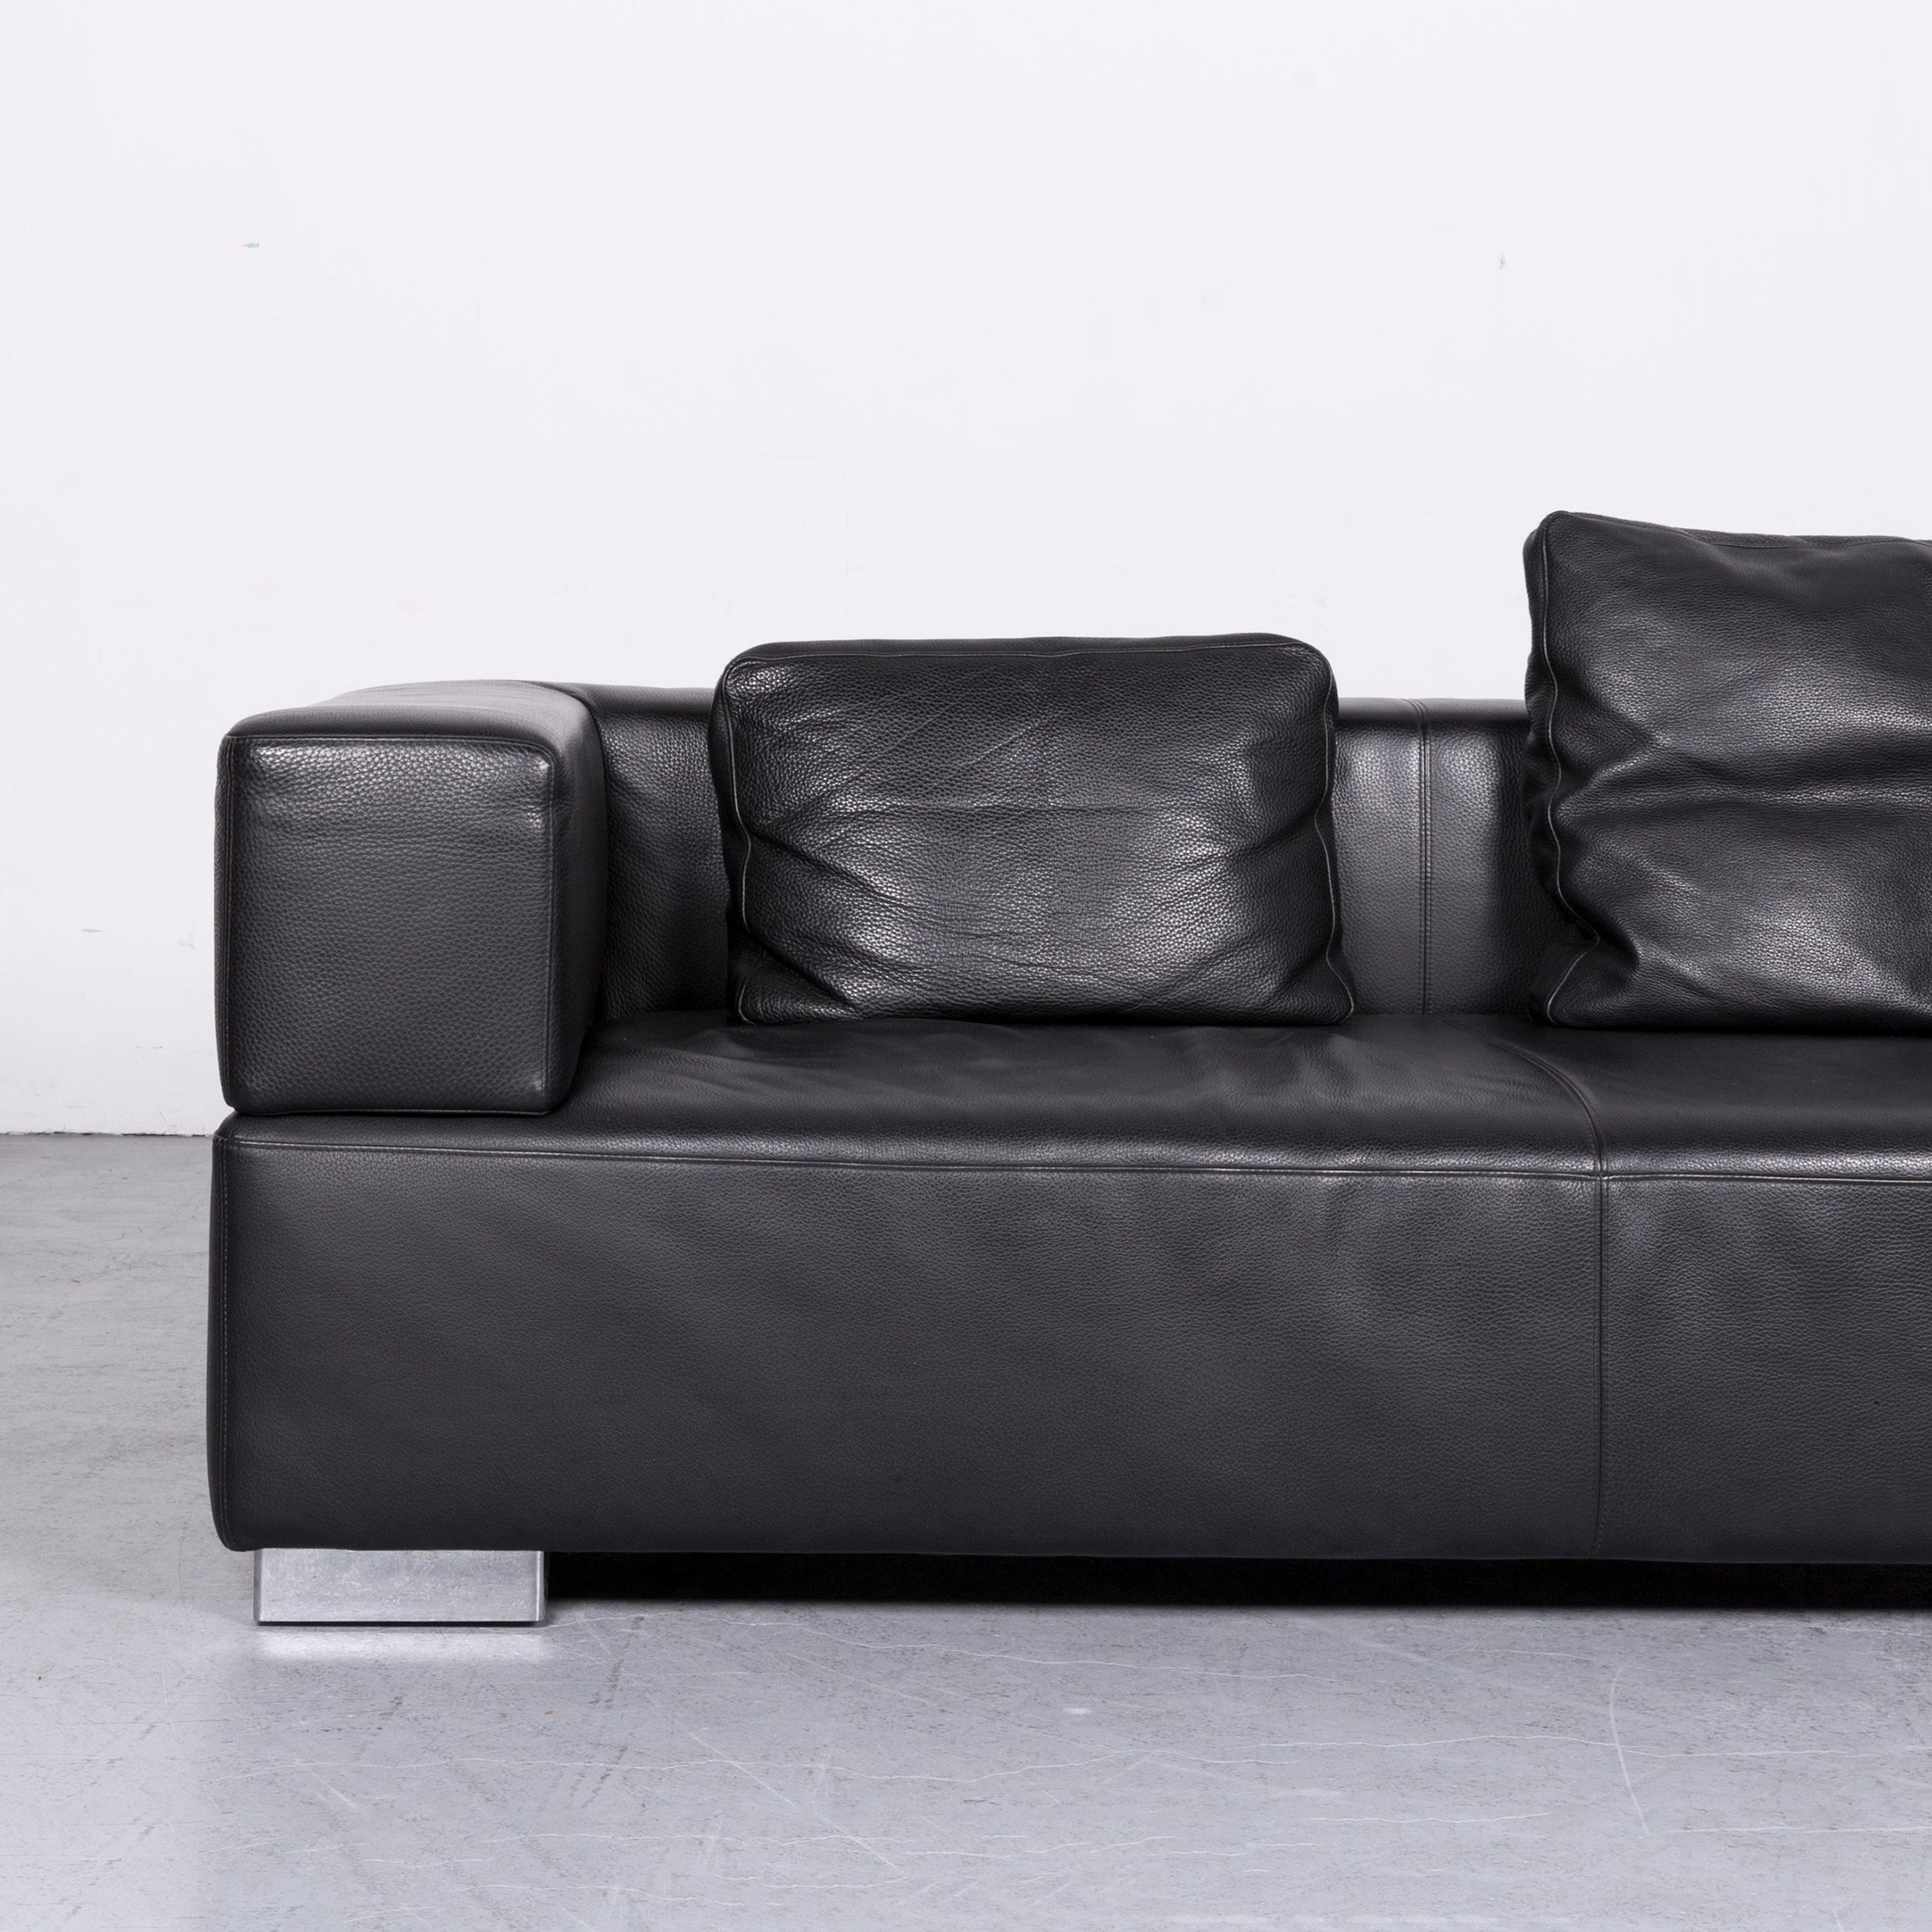 Brühl & Sippold Designer Sofa Set Leather Black Two-Seat Couch Modern In Good Condition For Sale In Cologne, DE